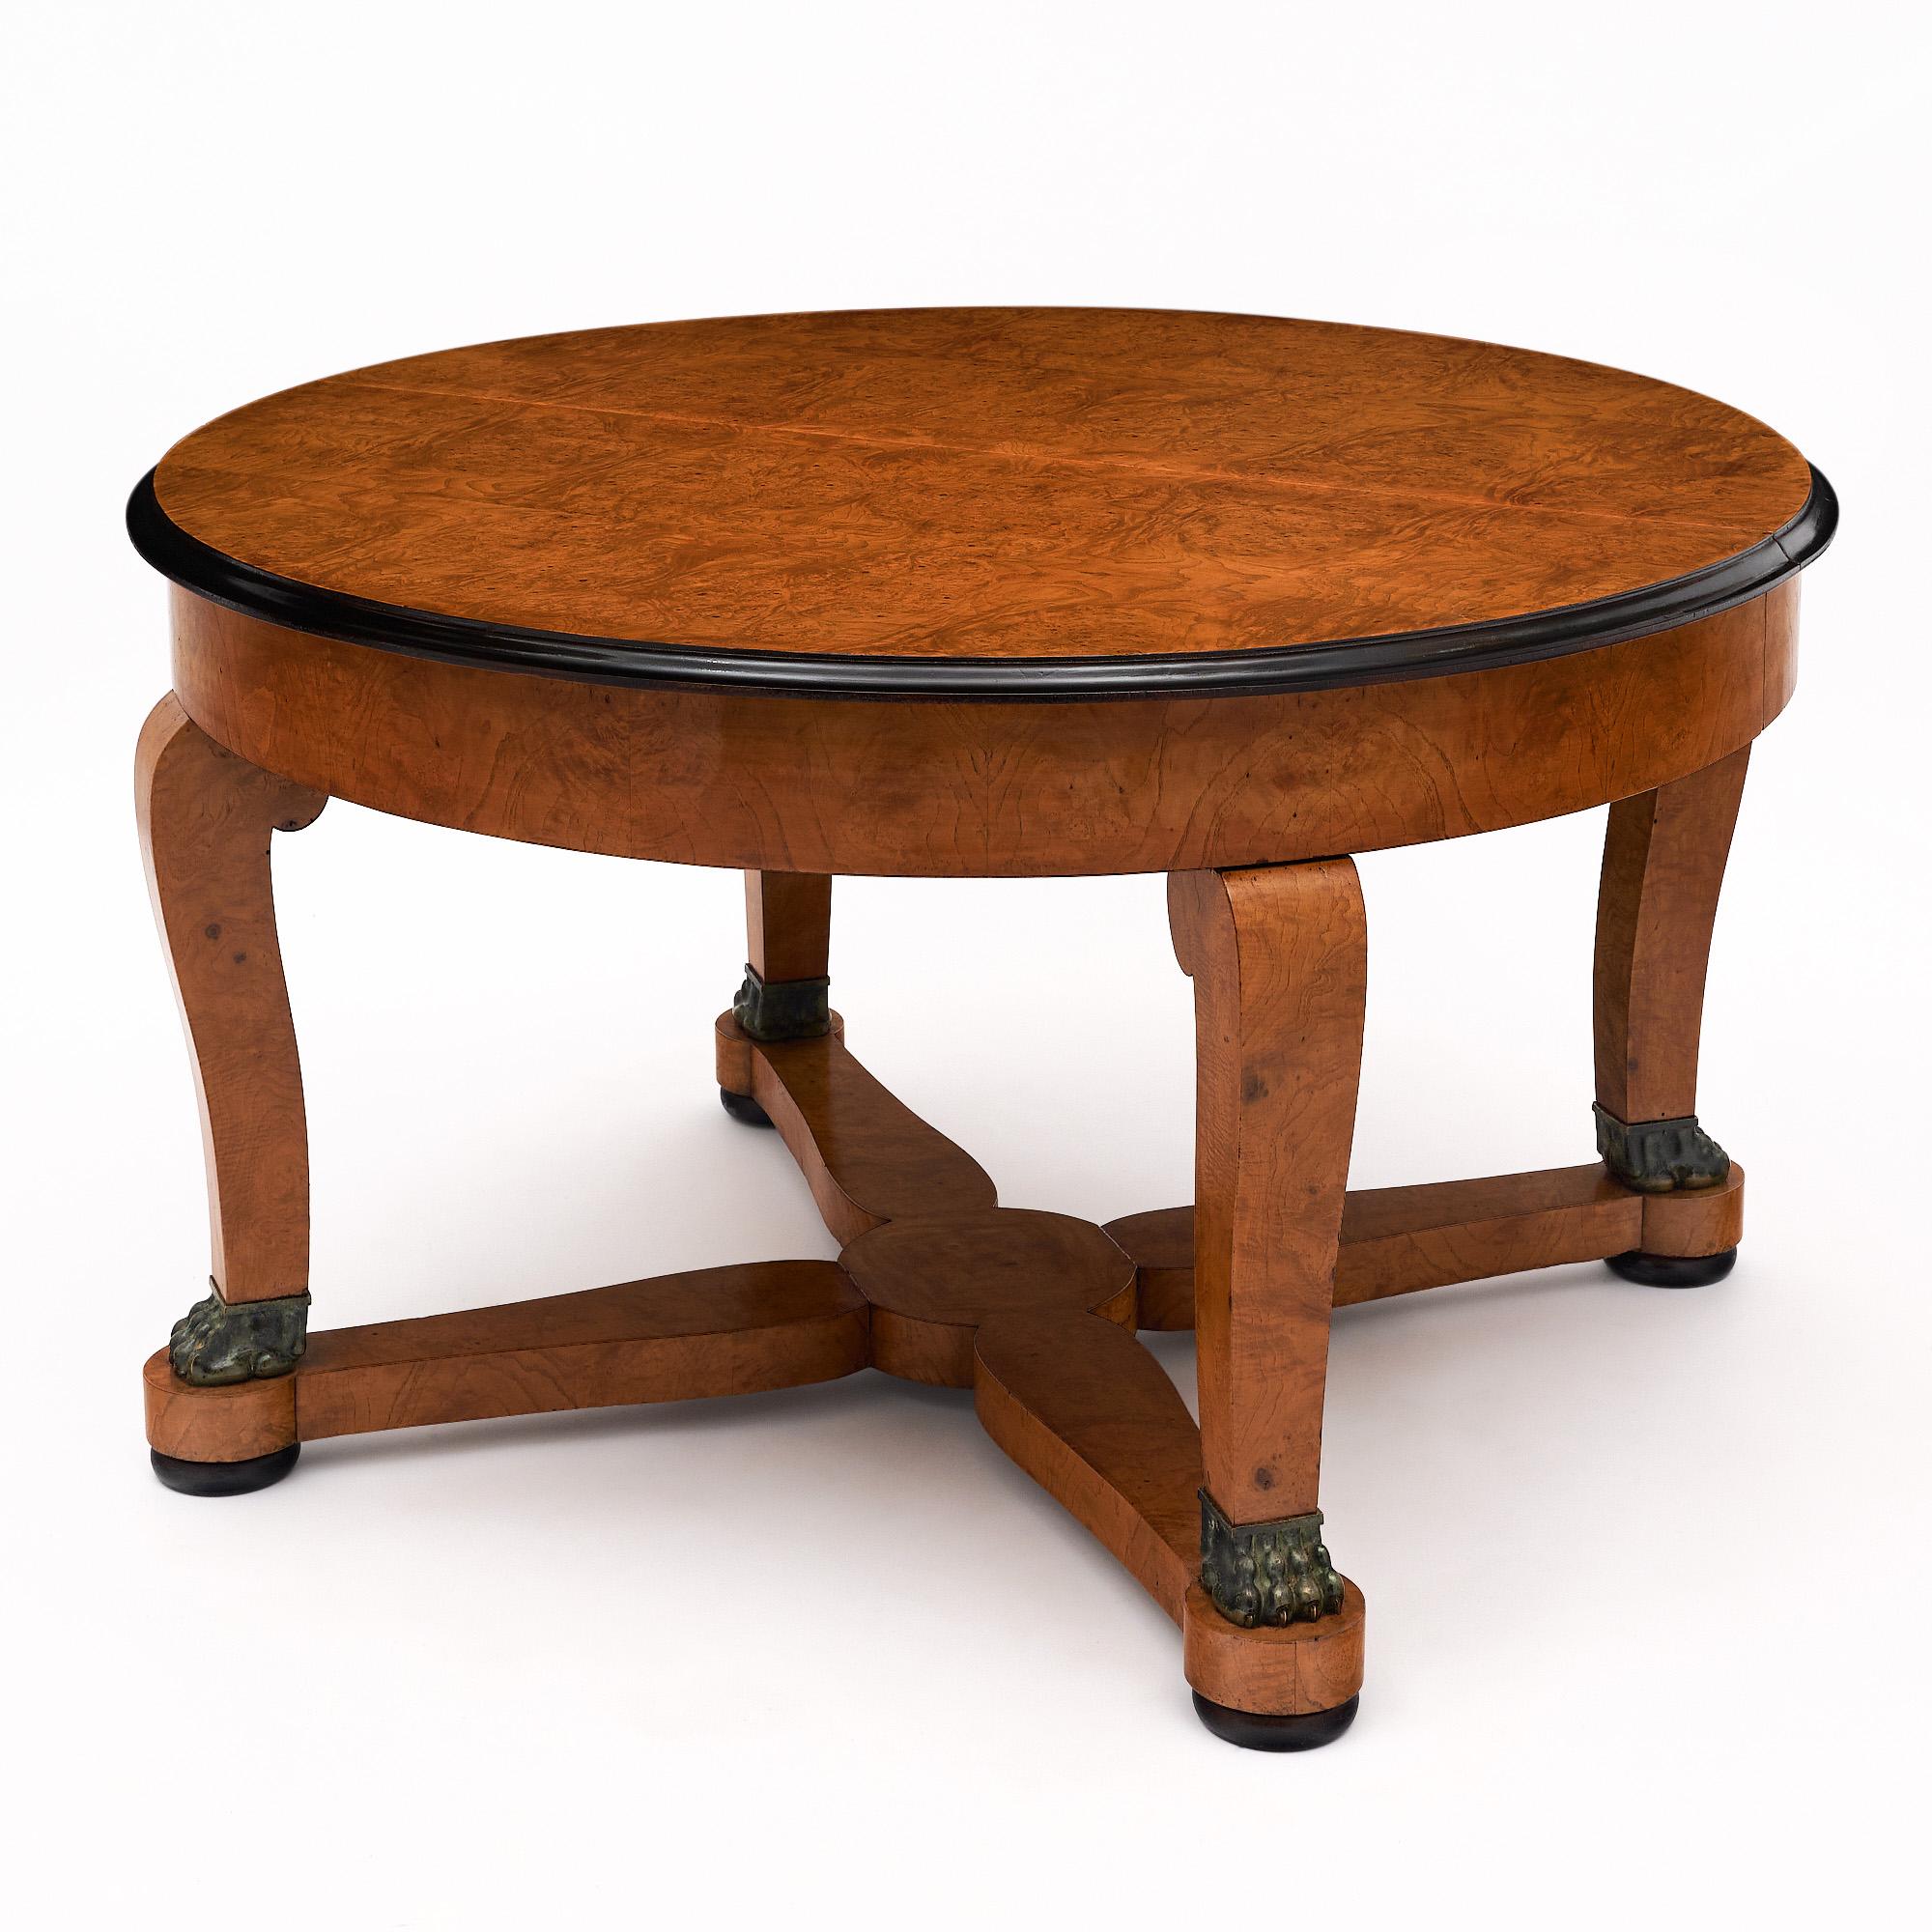 Library table in the French Empire style. This piece is made of solid ash and burled ash. Four curved legs are connected with an x-stretcher. Each leg boasts a bronze lion's paw foot. The table features ebonized detailing on the trim and feet. The